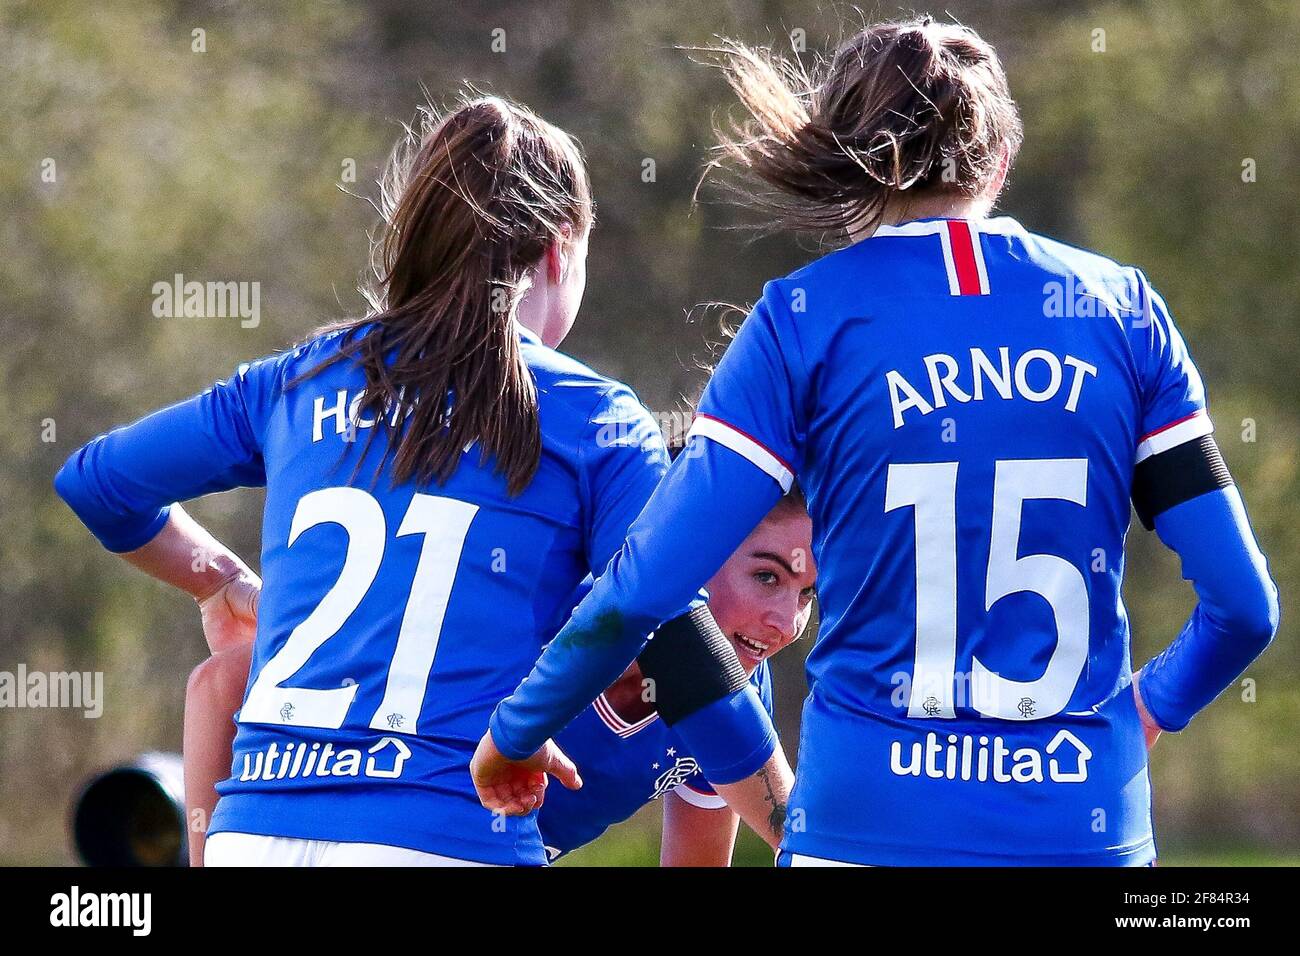 Glasgow, UK. 11th Apr, 2021. Lizzie Arnot (#15) of Rangers Women FC celebrates with Kirsty Howart (#21) of Rangers Women FC & Emma Brownlie (#4) of Rangers Women FC following their opening goal during the Scottish Building Society SWPL1 Fixture Rangers FC vs Spartans FC at Rangers Training Centre, Glasgow, 11/04/2021 | Images courtesy of www.collargeimages.co.uk Credit: Colin Poultney/Alamy Live News Stock Photo